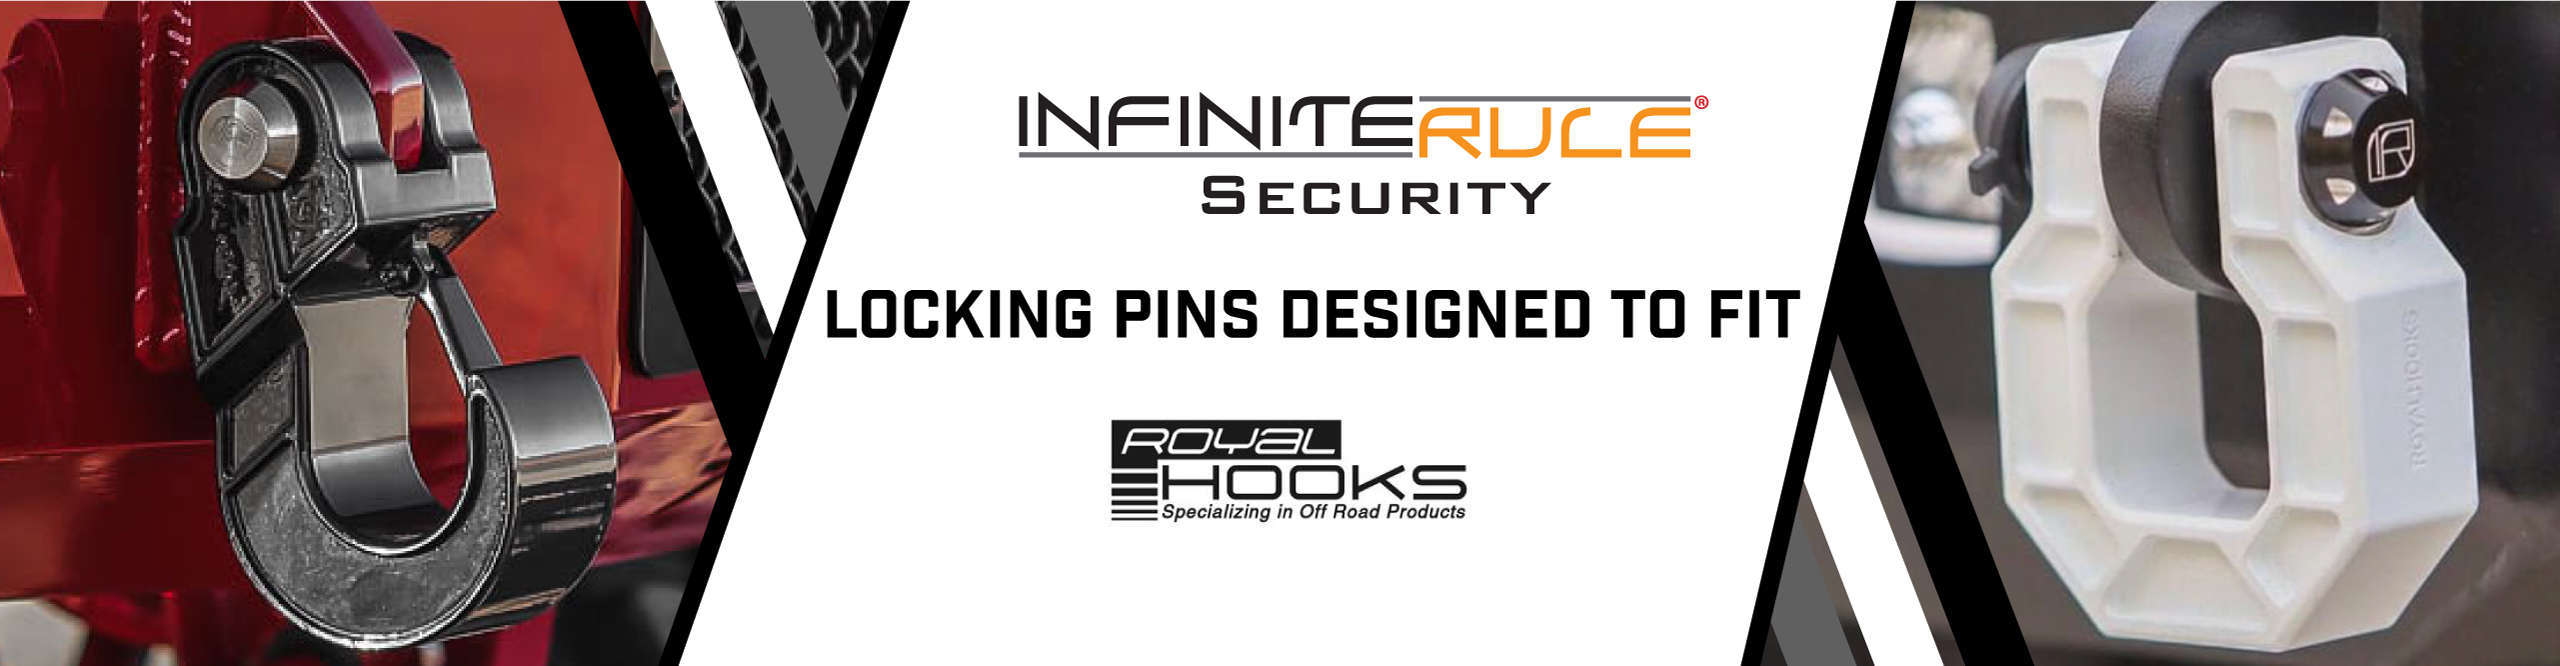 SS Locking Pin - 1 PACK (Infiniterule) for Royal Hooks and Shackles